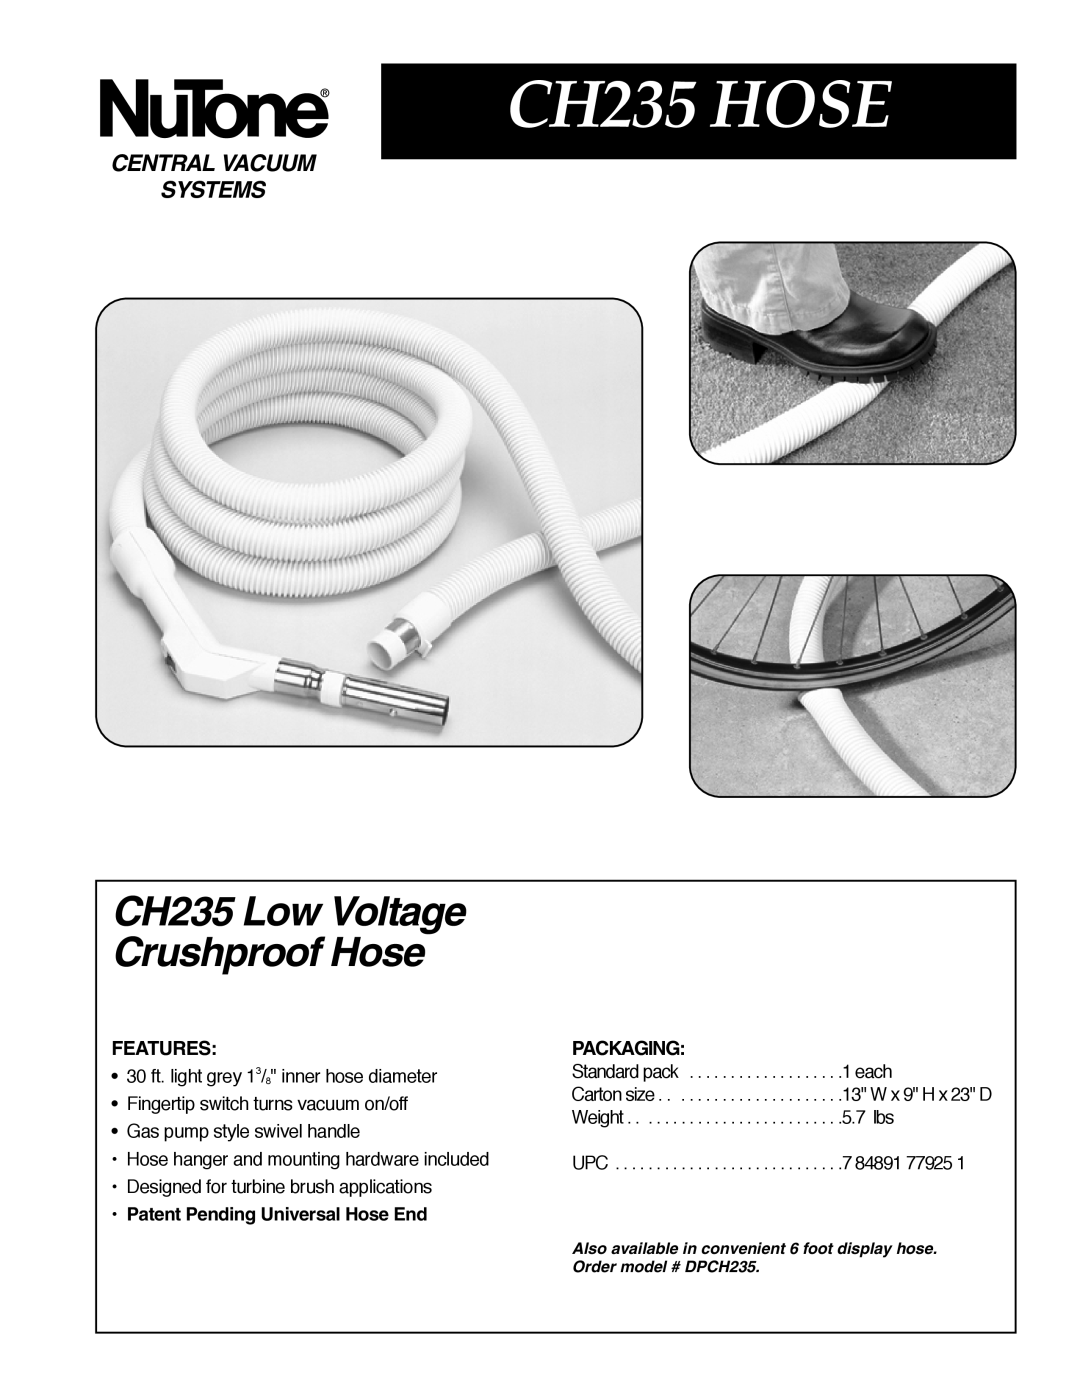 NuTone manual CH235 HOSE, CH235 Low Voltage, Crushproof Hose, Central Vacuum Systems, Features, Packaging 